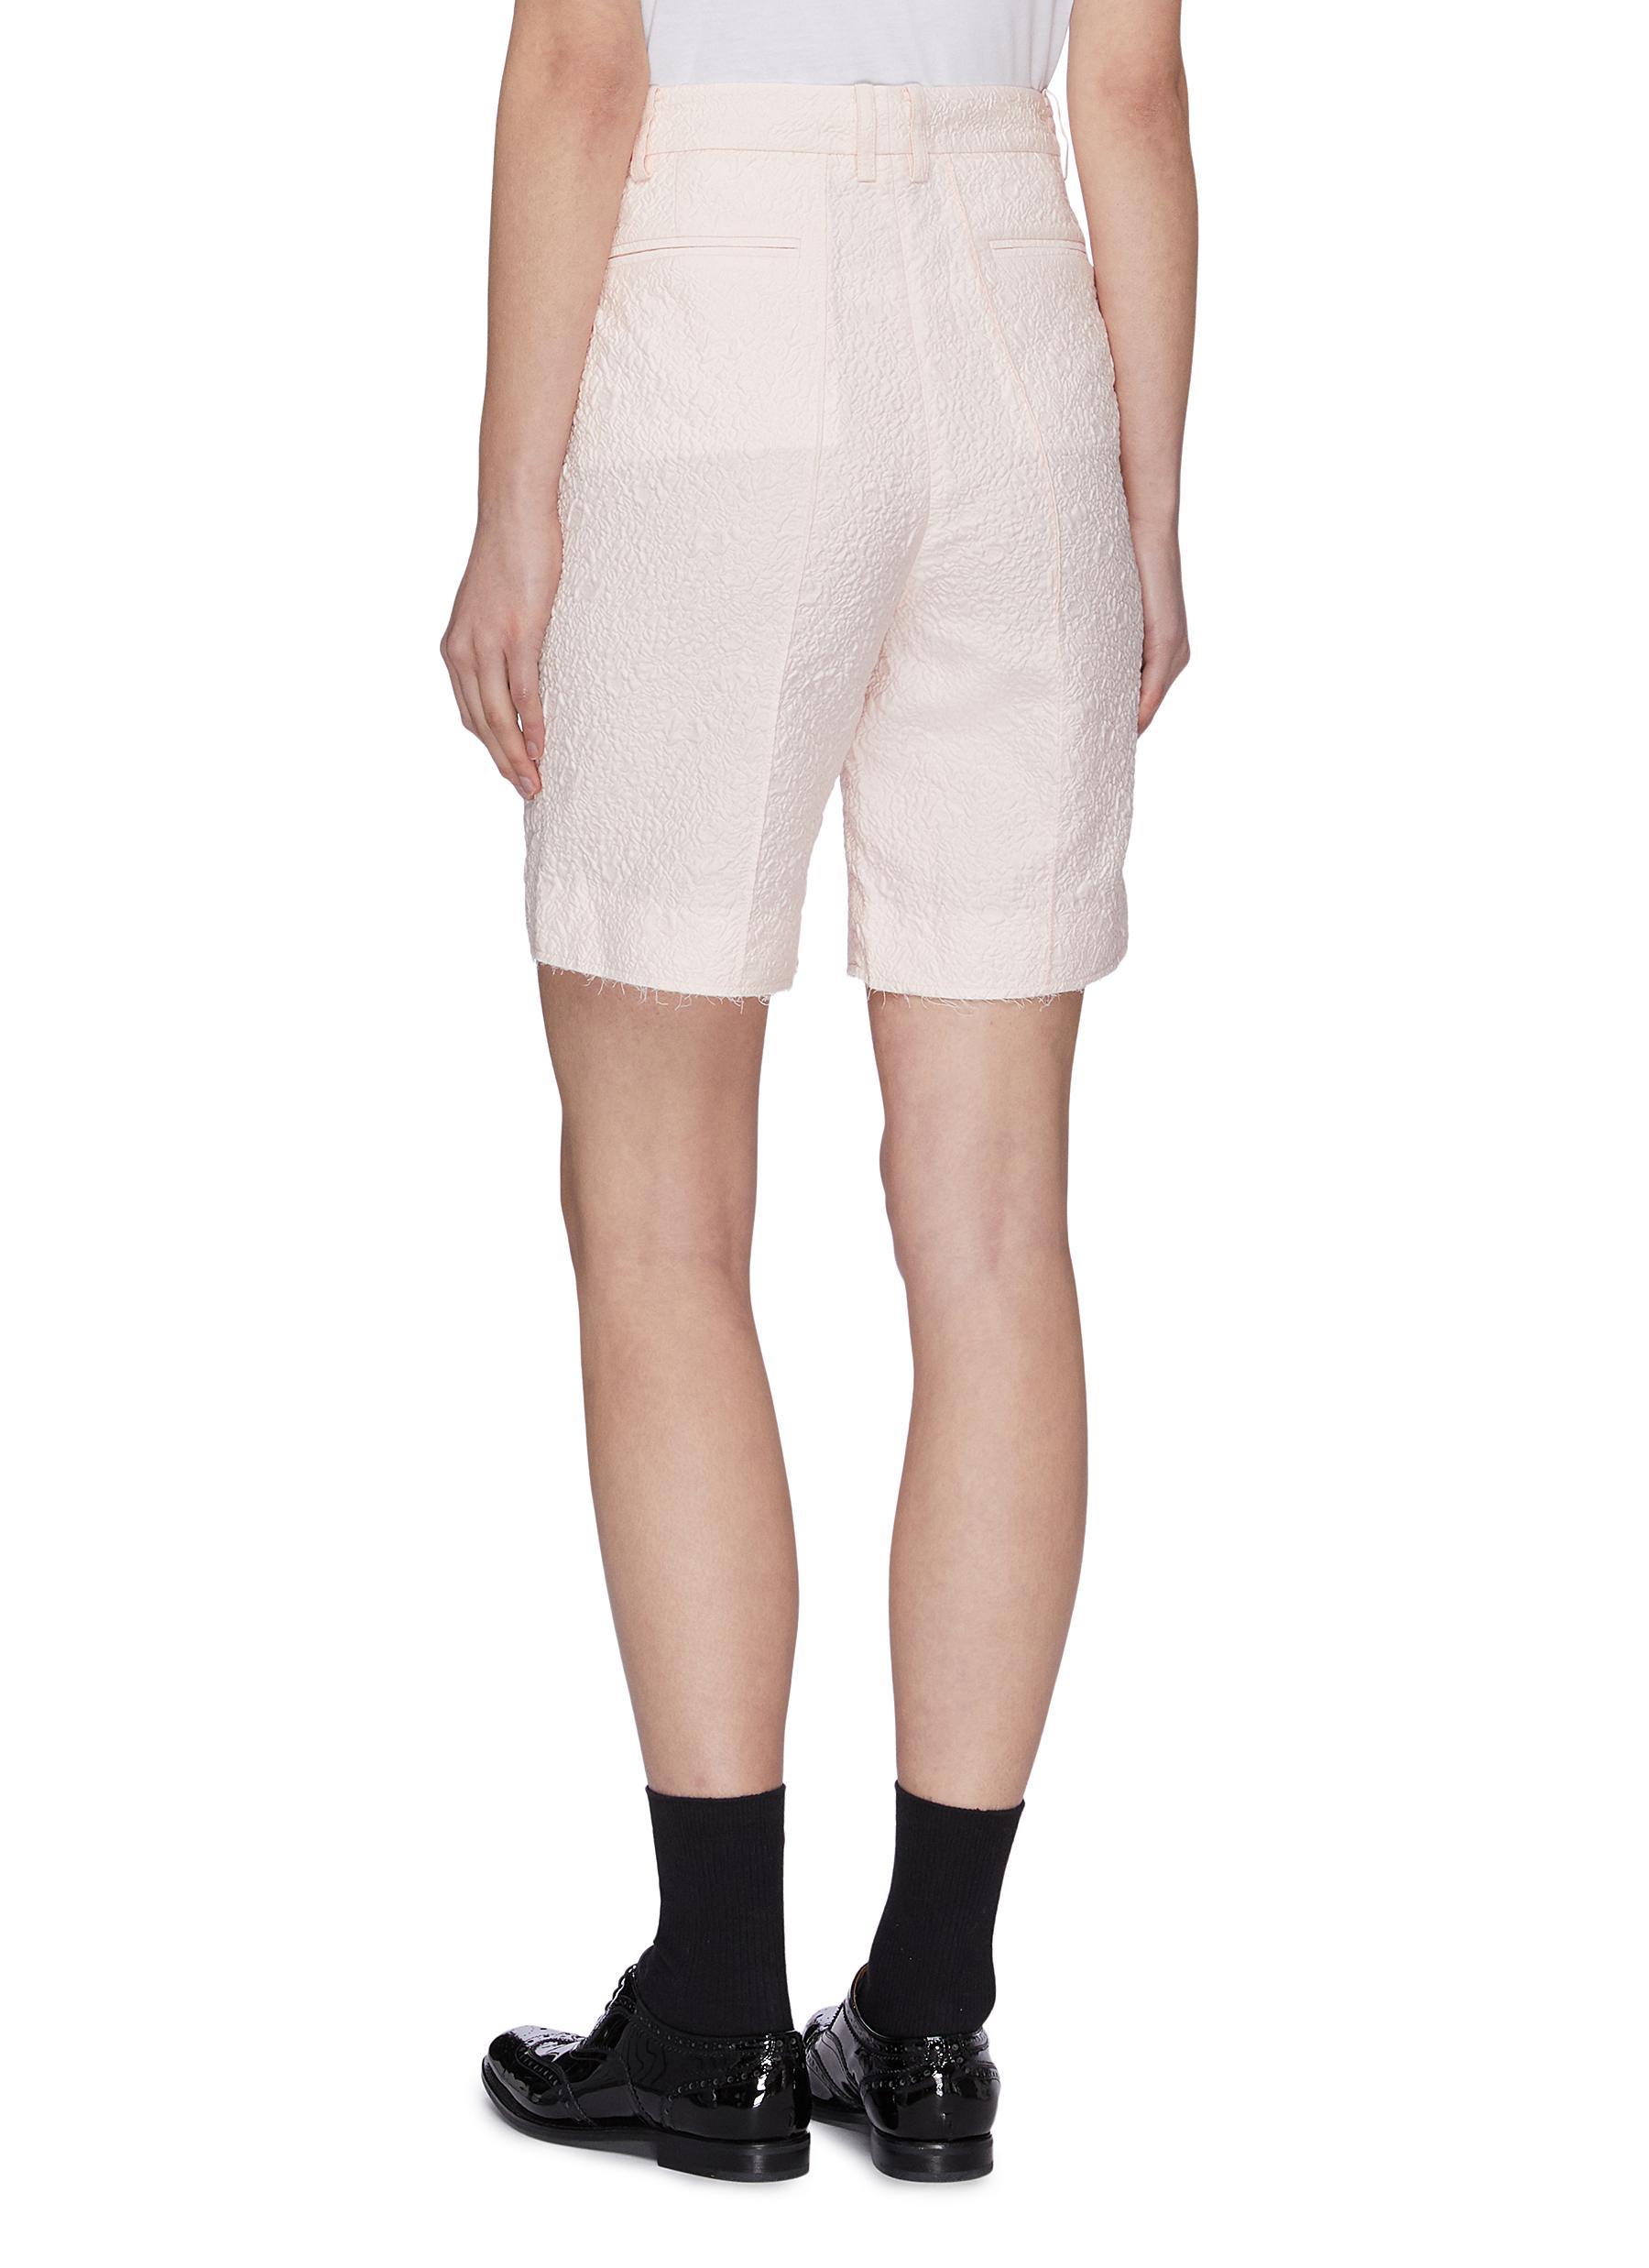 ShuShu/Tong Cotton Raw Edge Hammered Shorts in Pink - Lyst